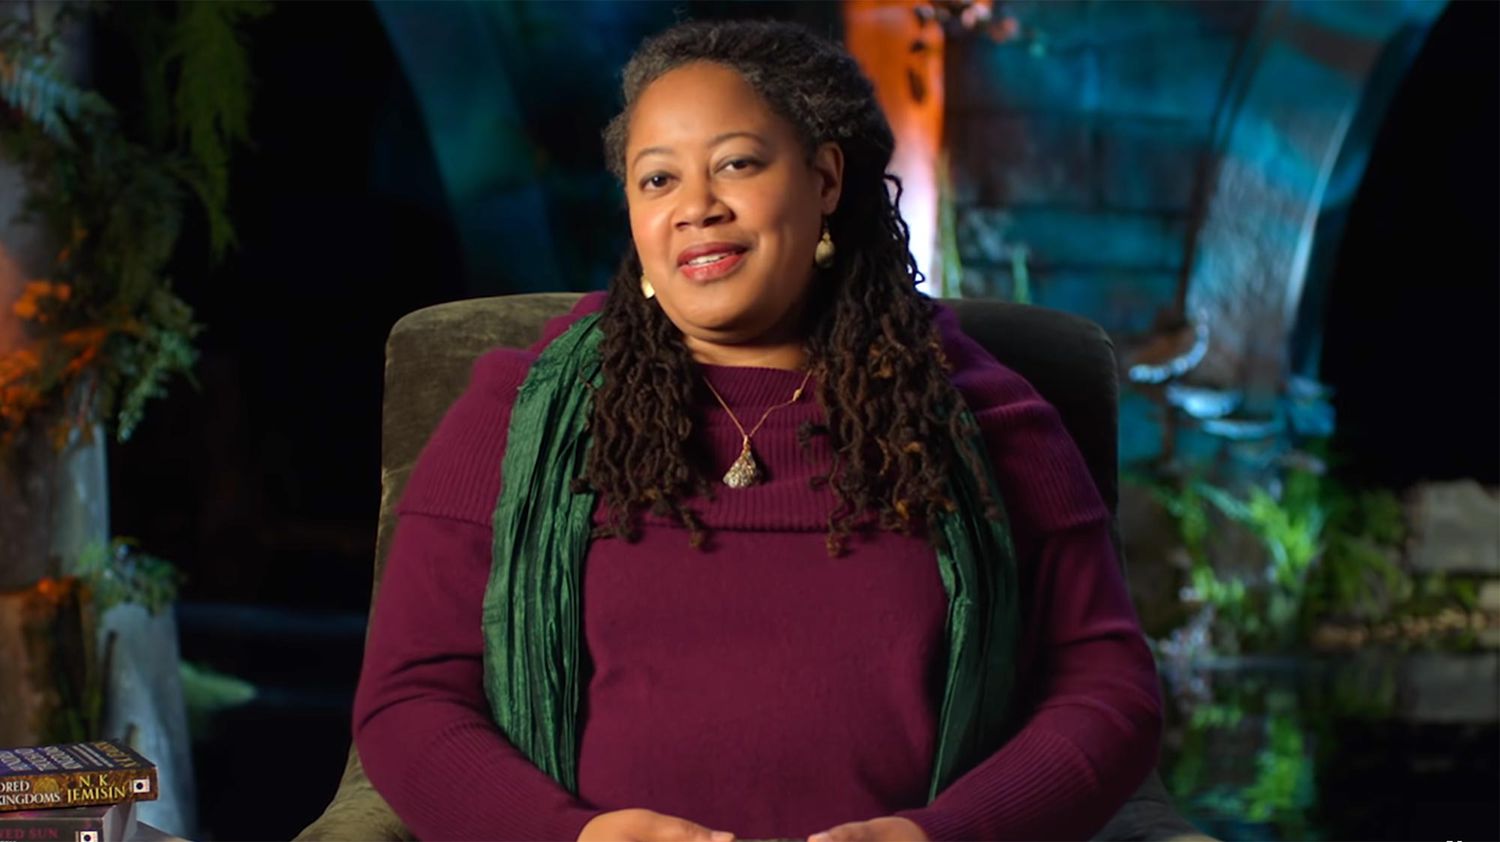 N.K. Jemisin discusses her MasterClass course, The City We Became sequel |  EW.com